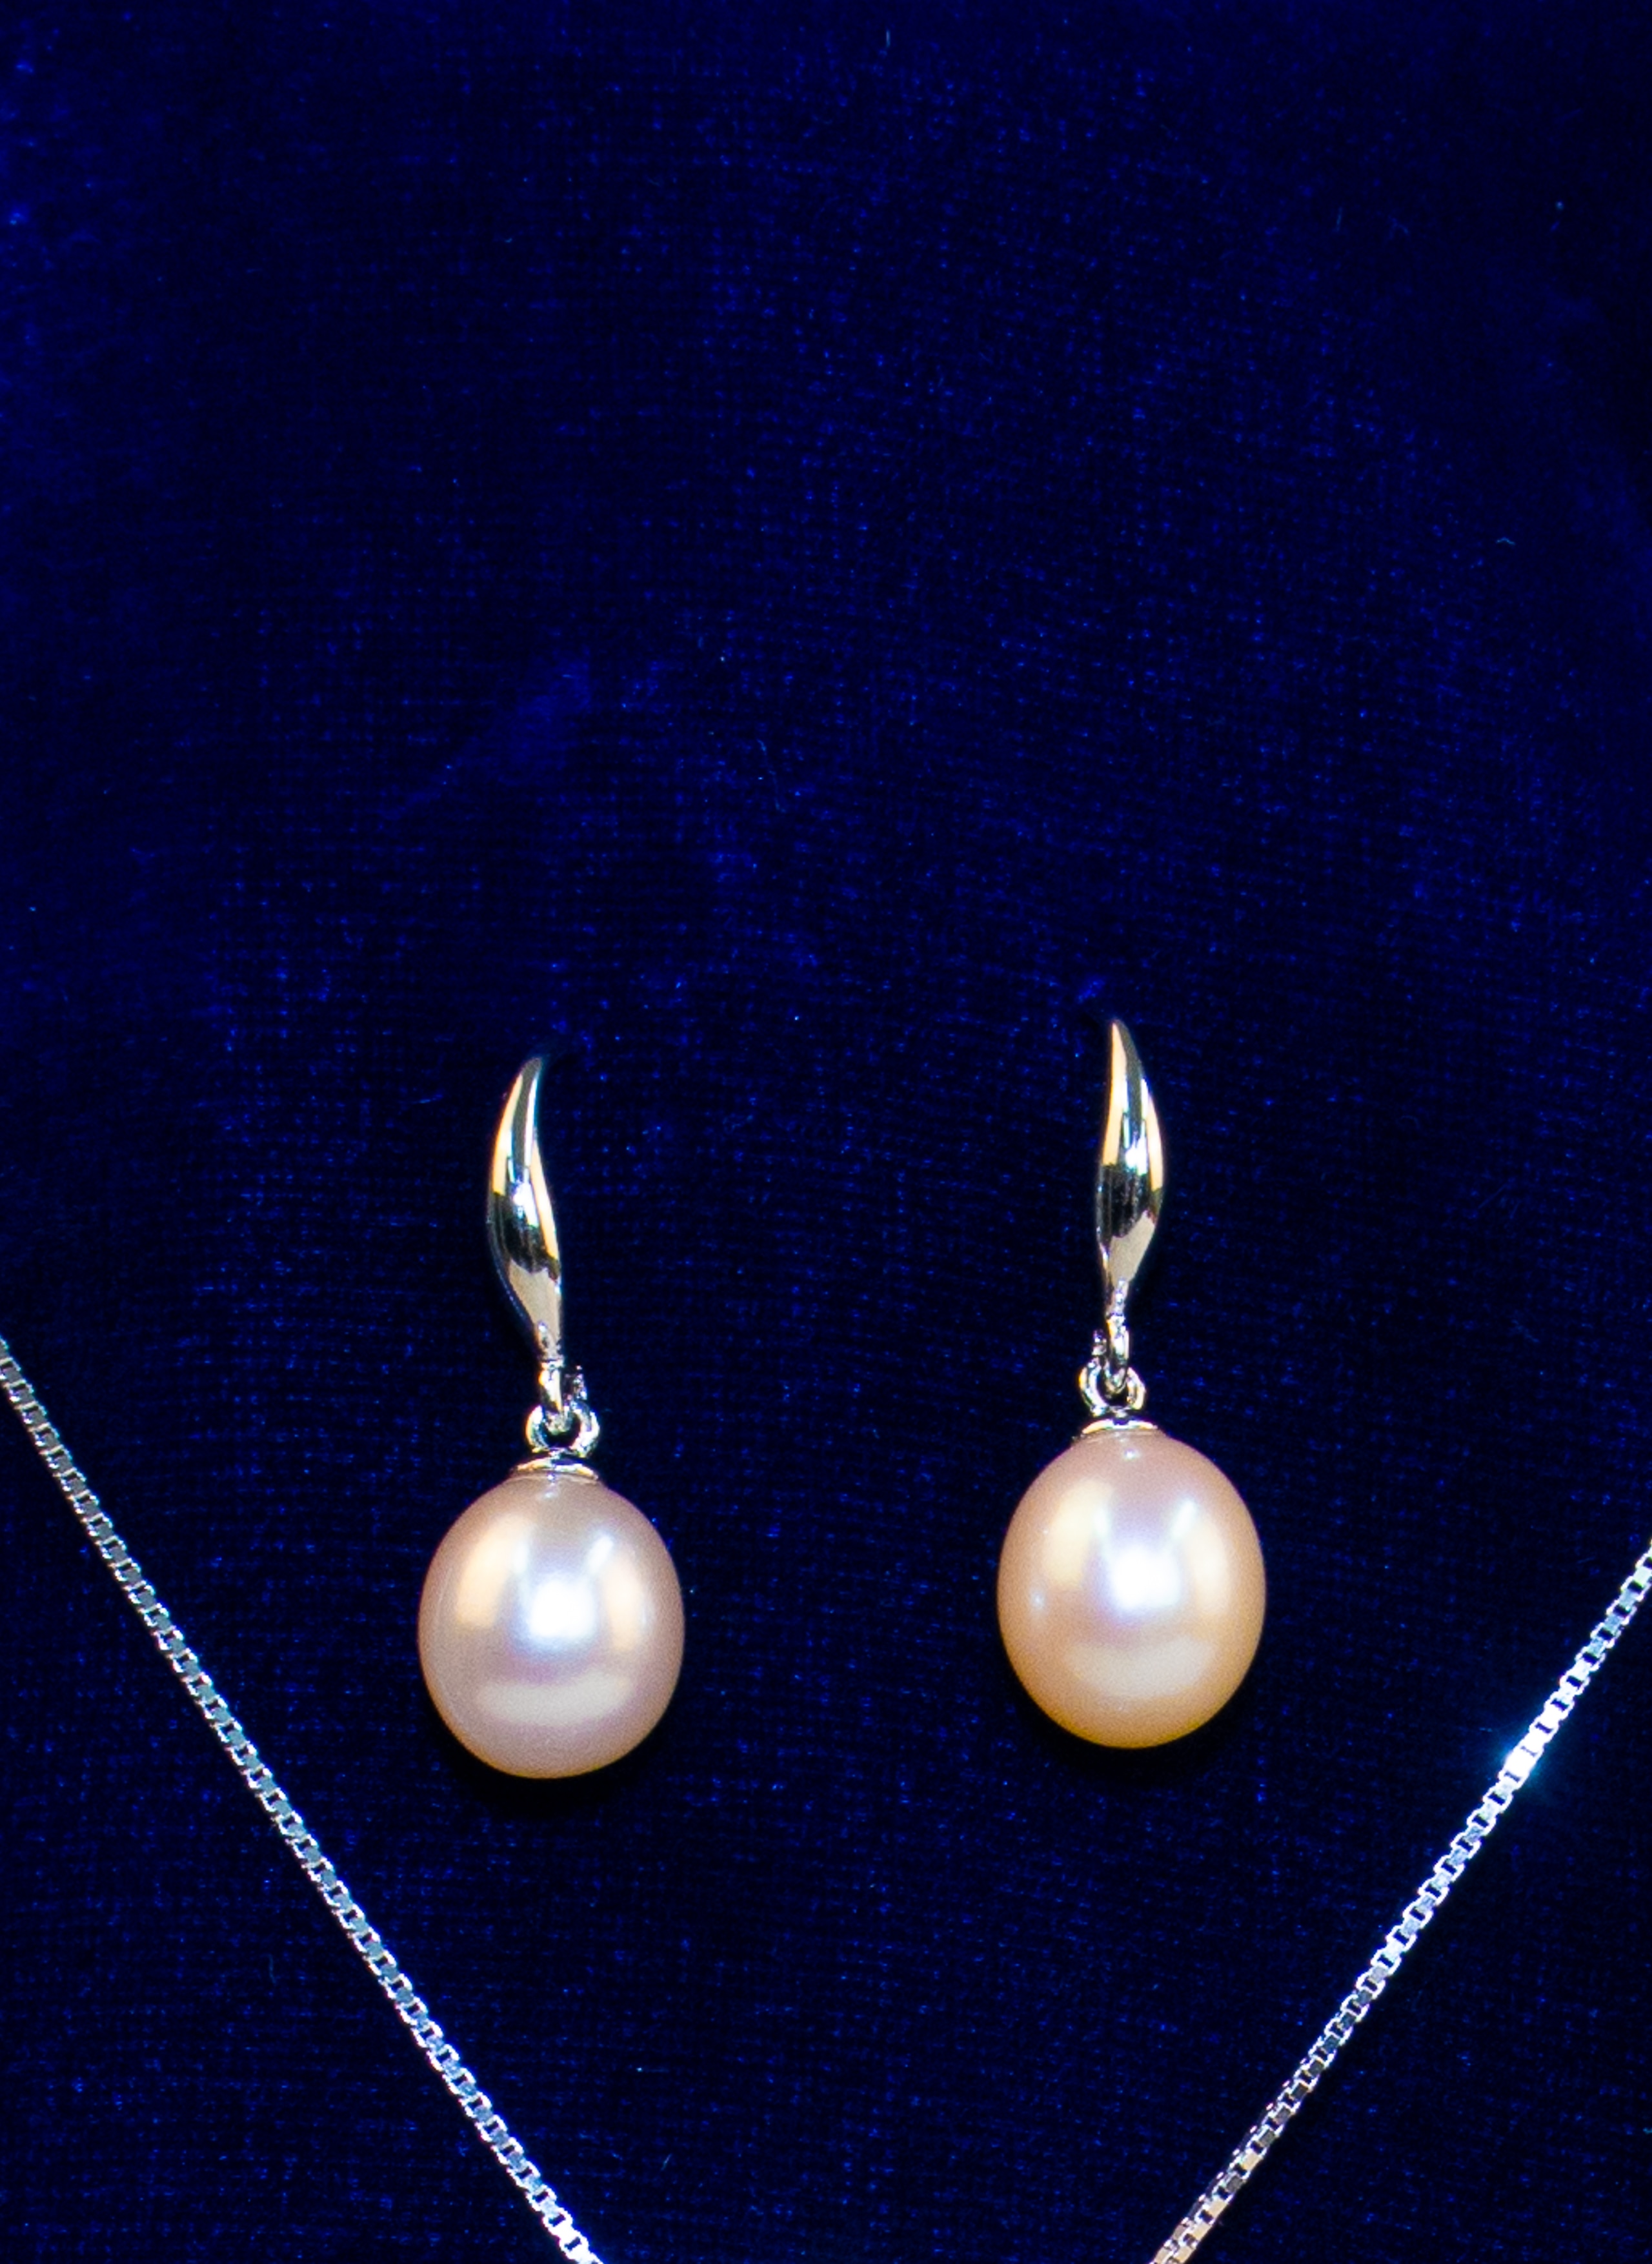 Earrings, Large Pearl Drops with Silver Hook, Pink